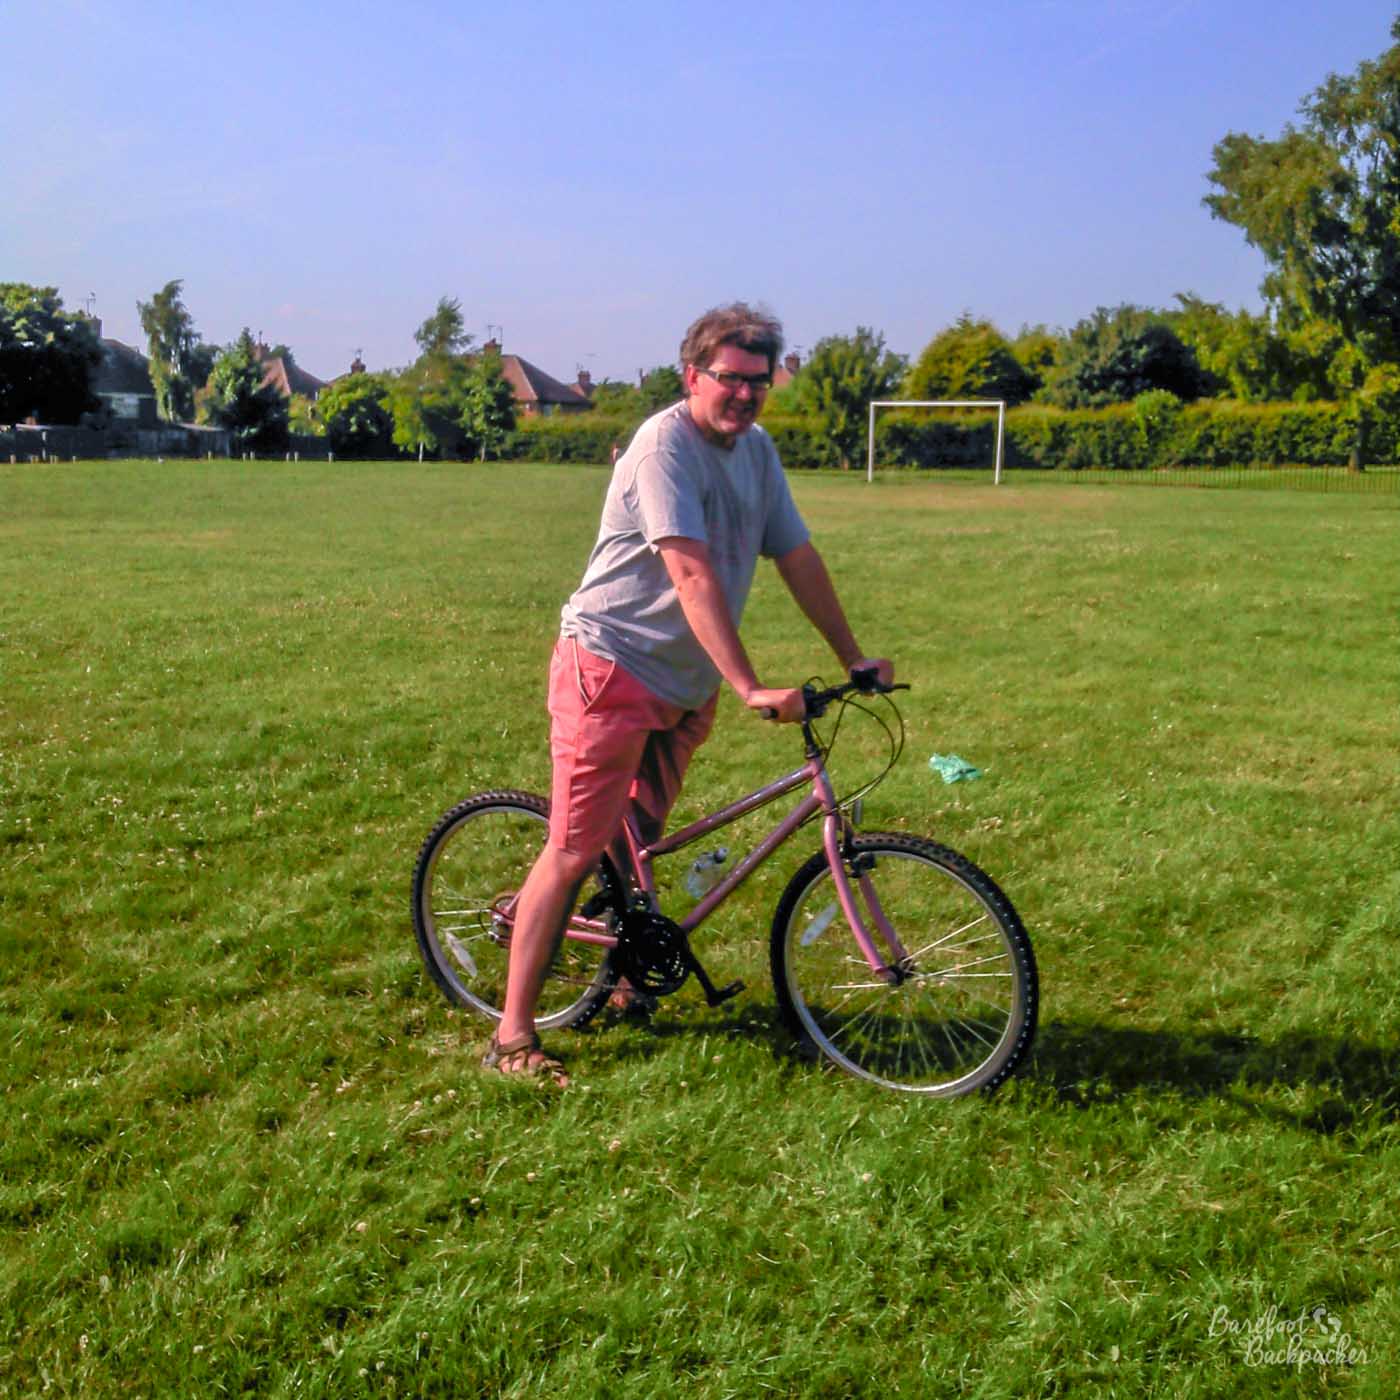 A playing field – a goal in front of some trees/bushes in the background, but mostly grass. Someone is kind of standing in the foreground over the saddle of a bicycle, so not riding it but looking like they're about to. The picture is slightly blurry, or at least not particularly sharp/in focus.